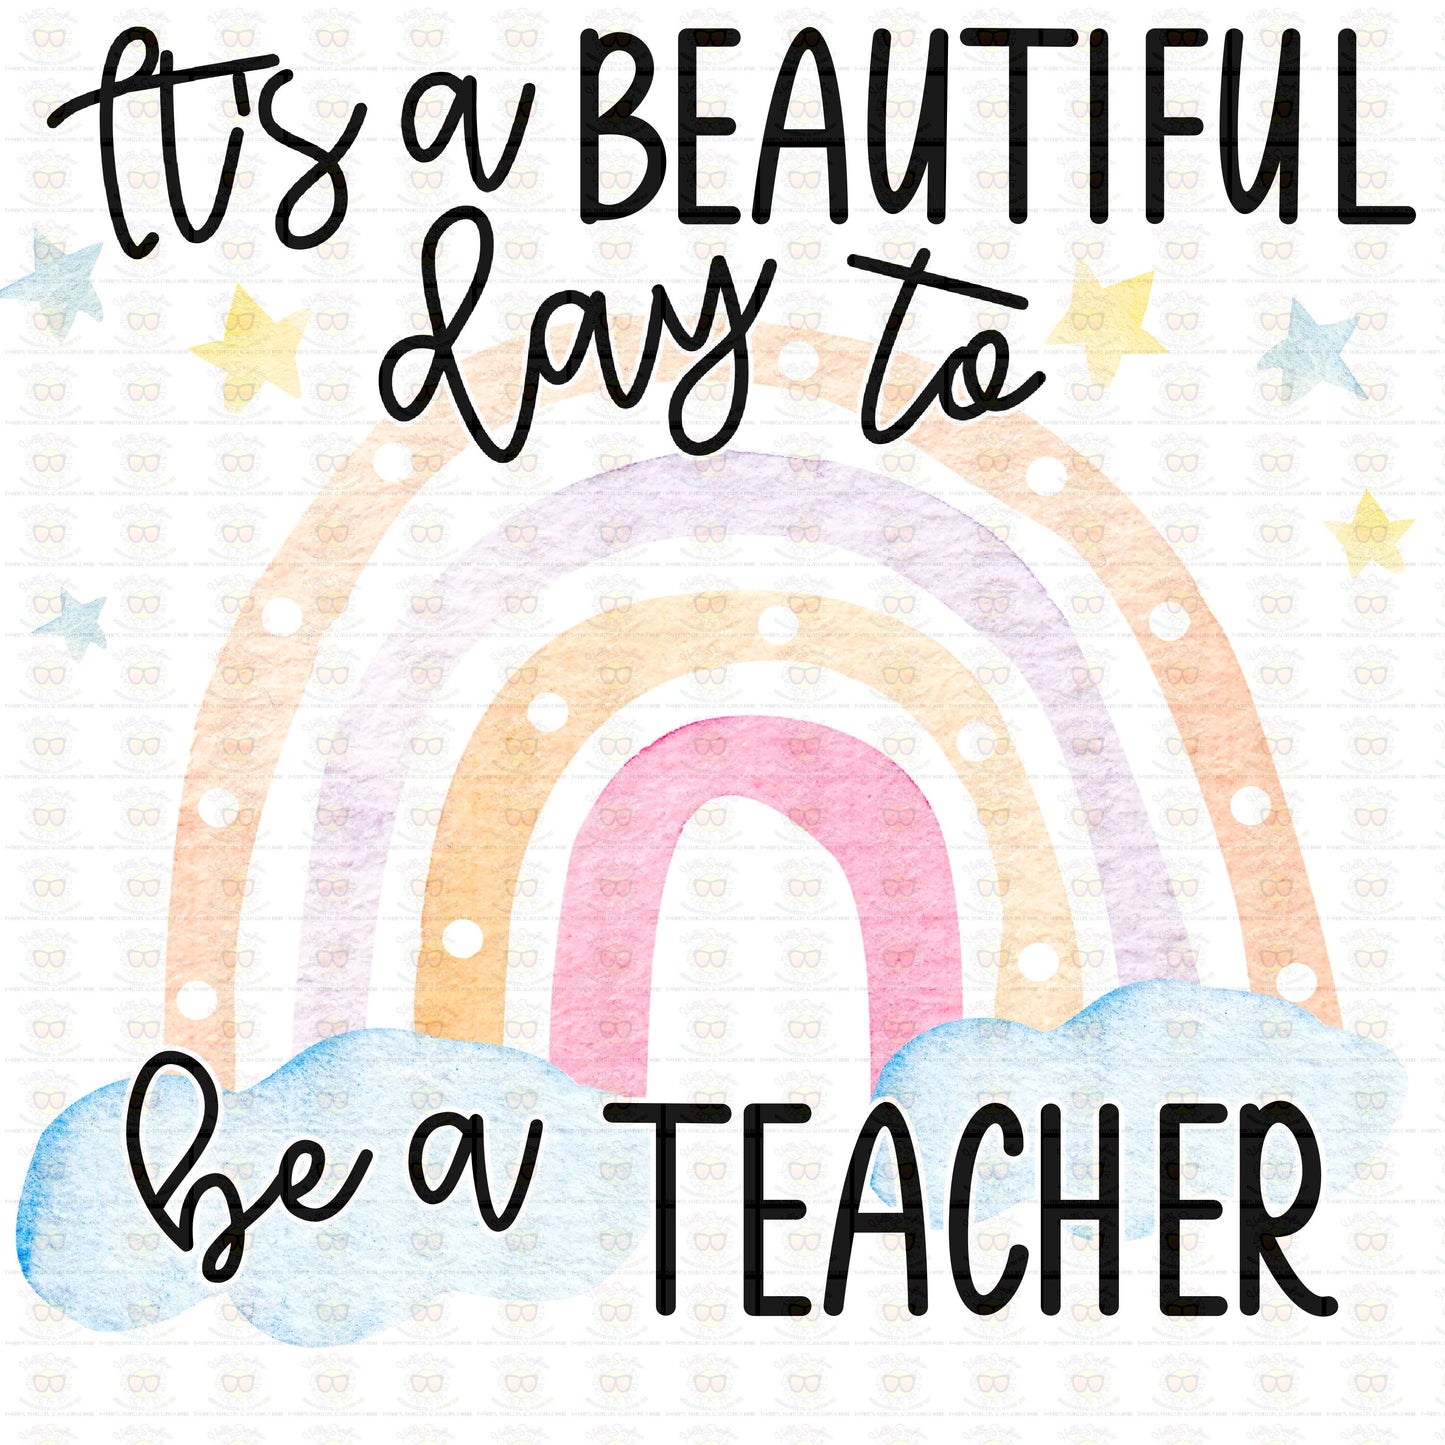 It's a Beautiful Day to be a Teacher